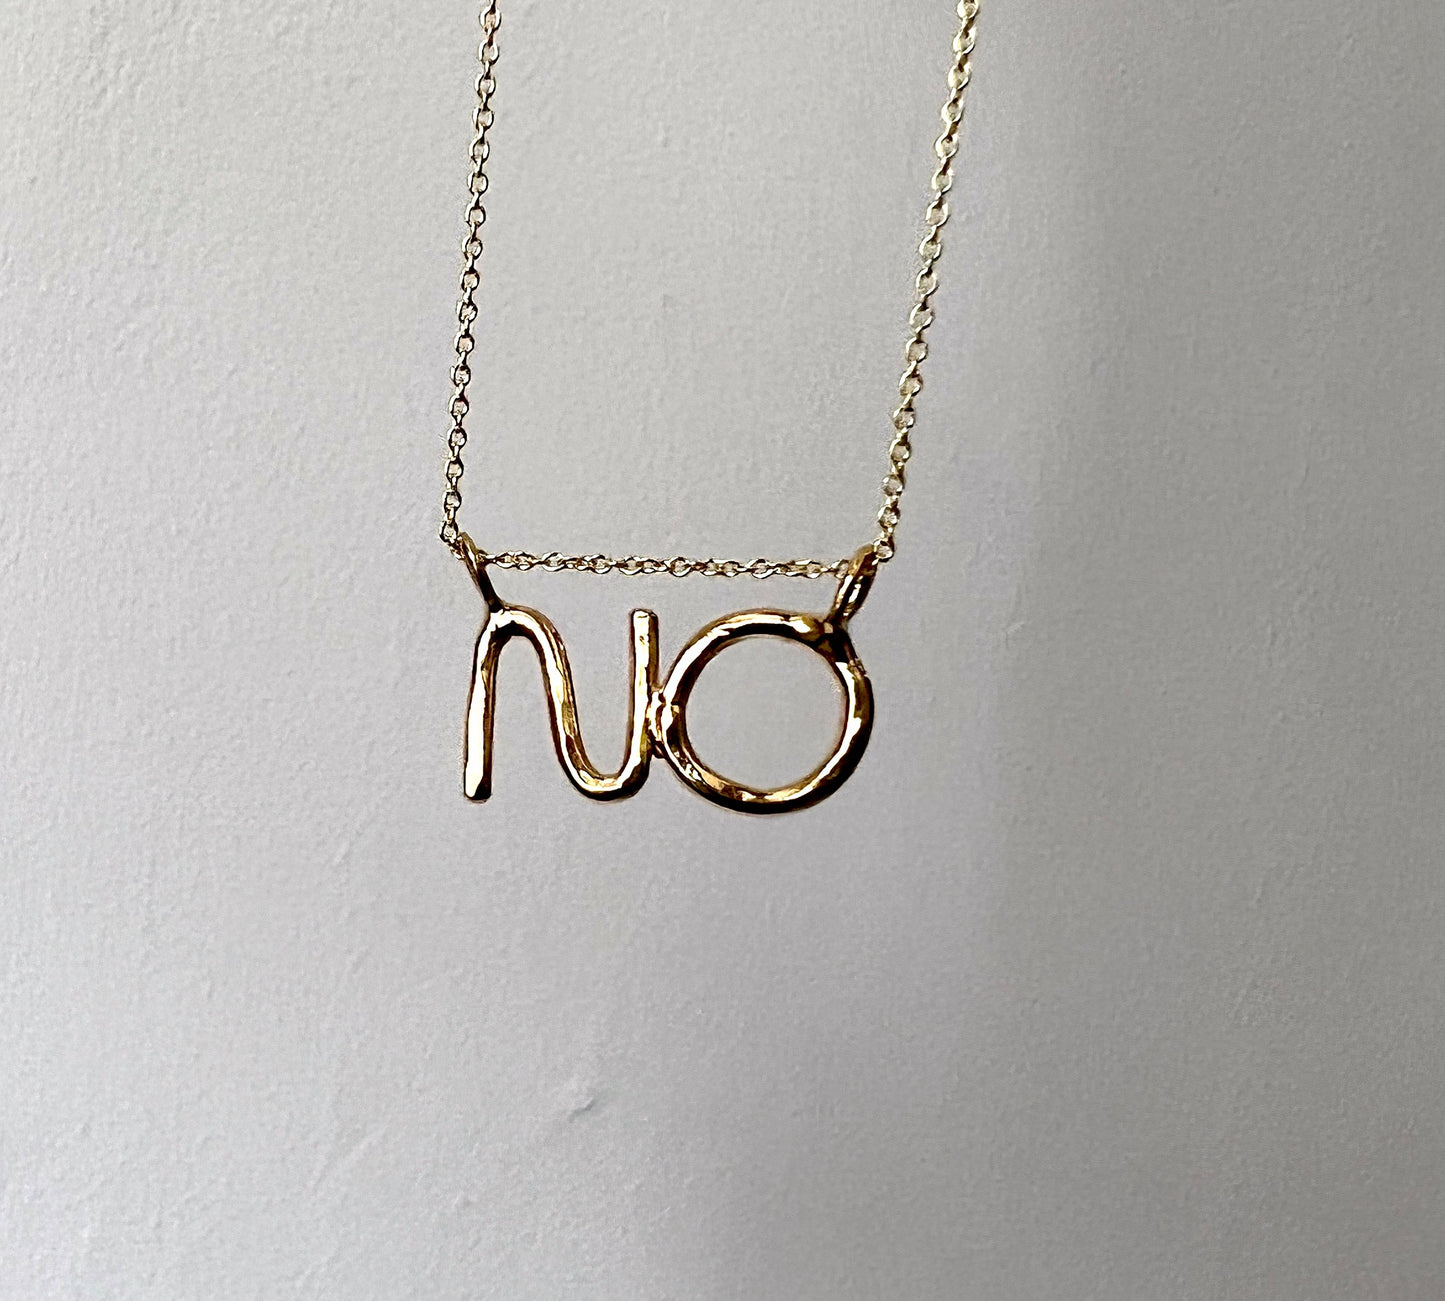 NO Pendant in Sterling Silver or 14k Gold Plated Brass